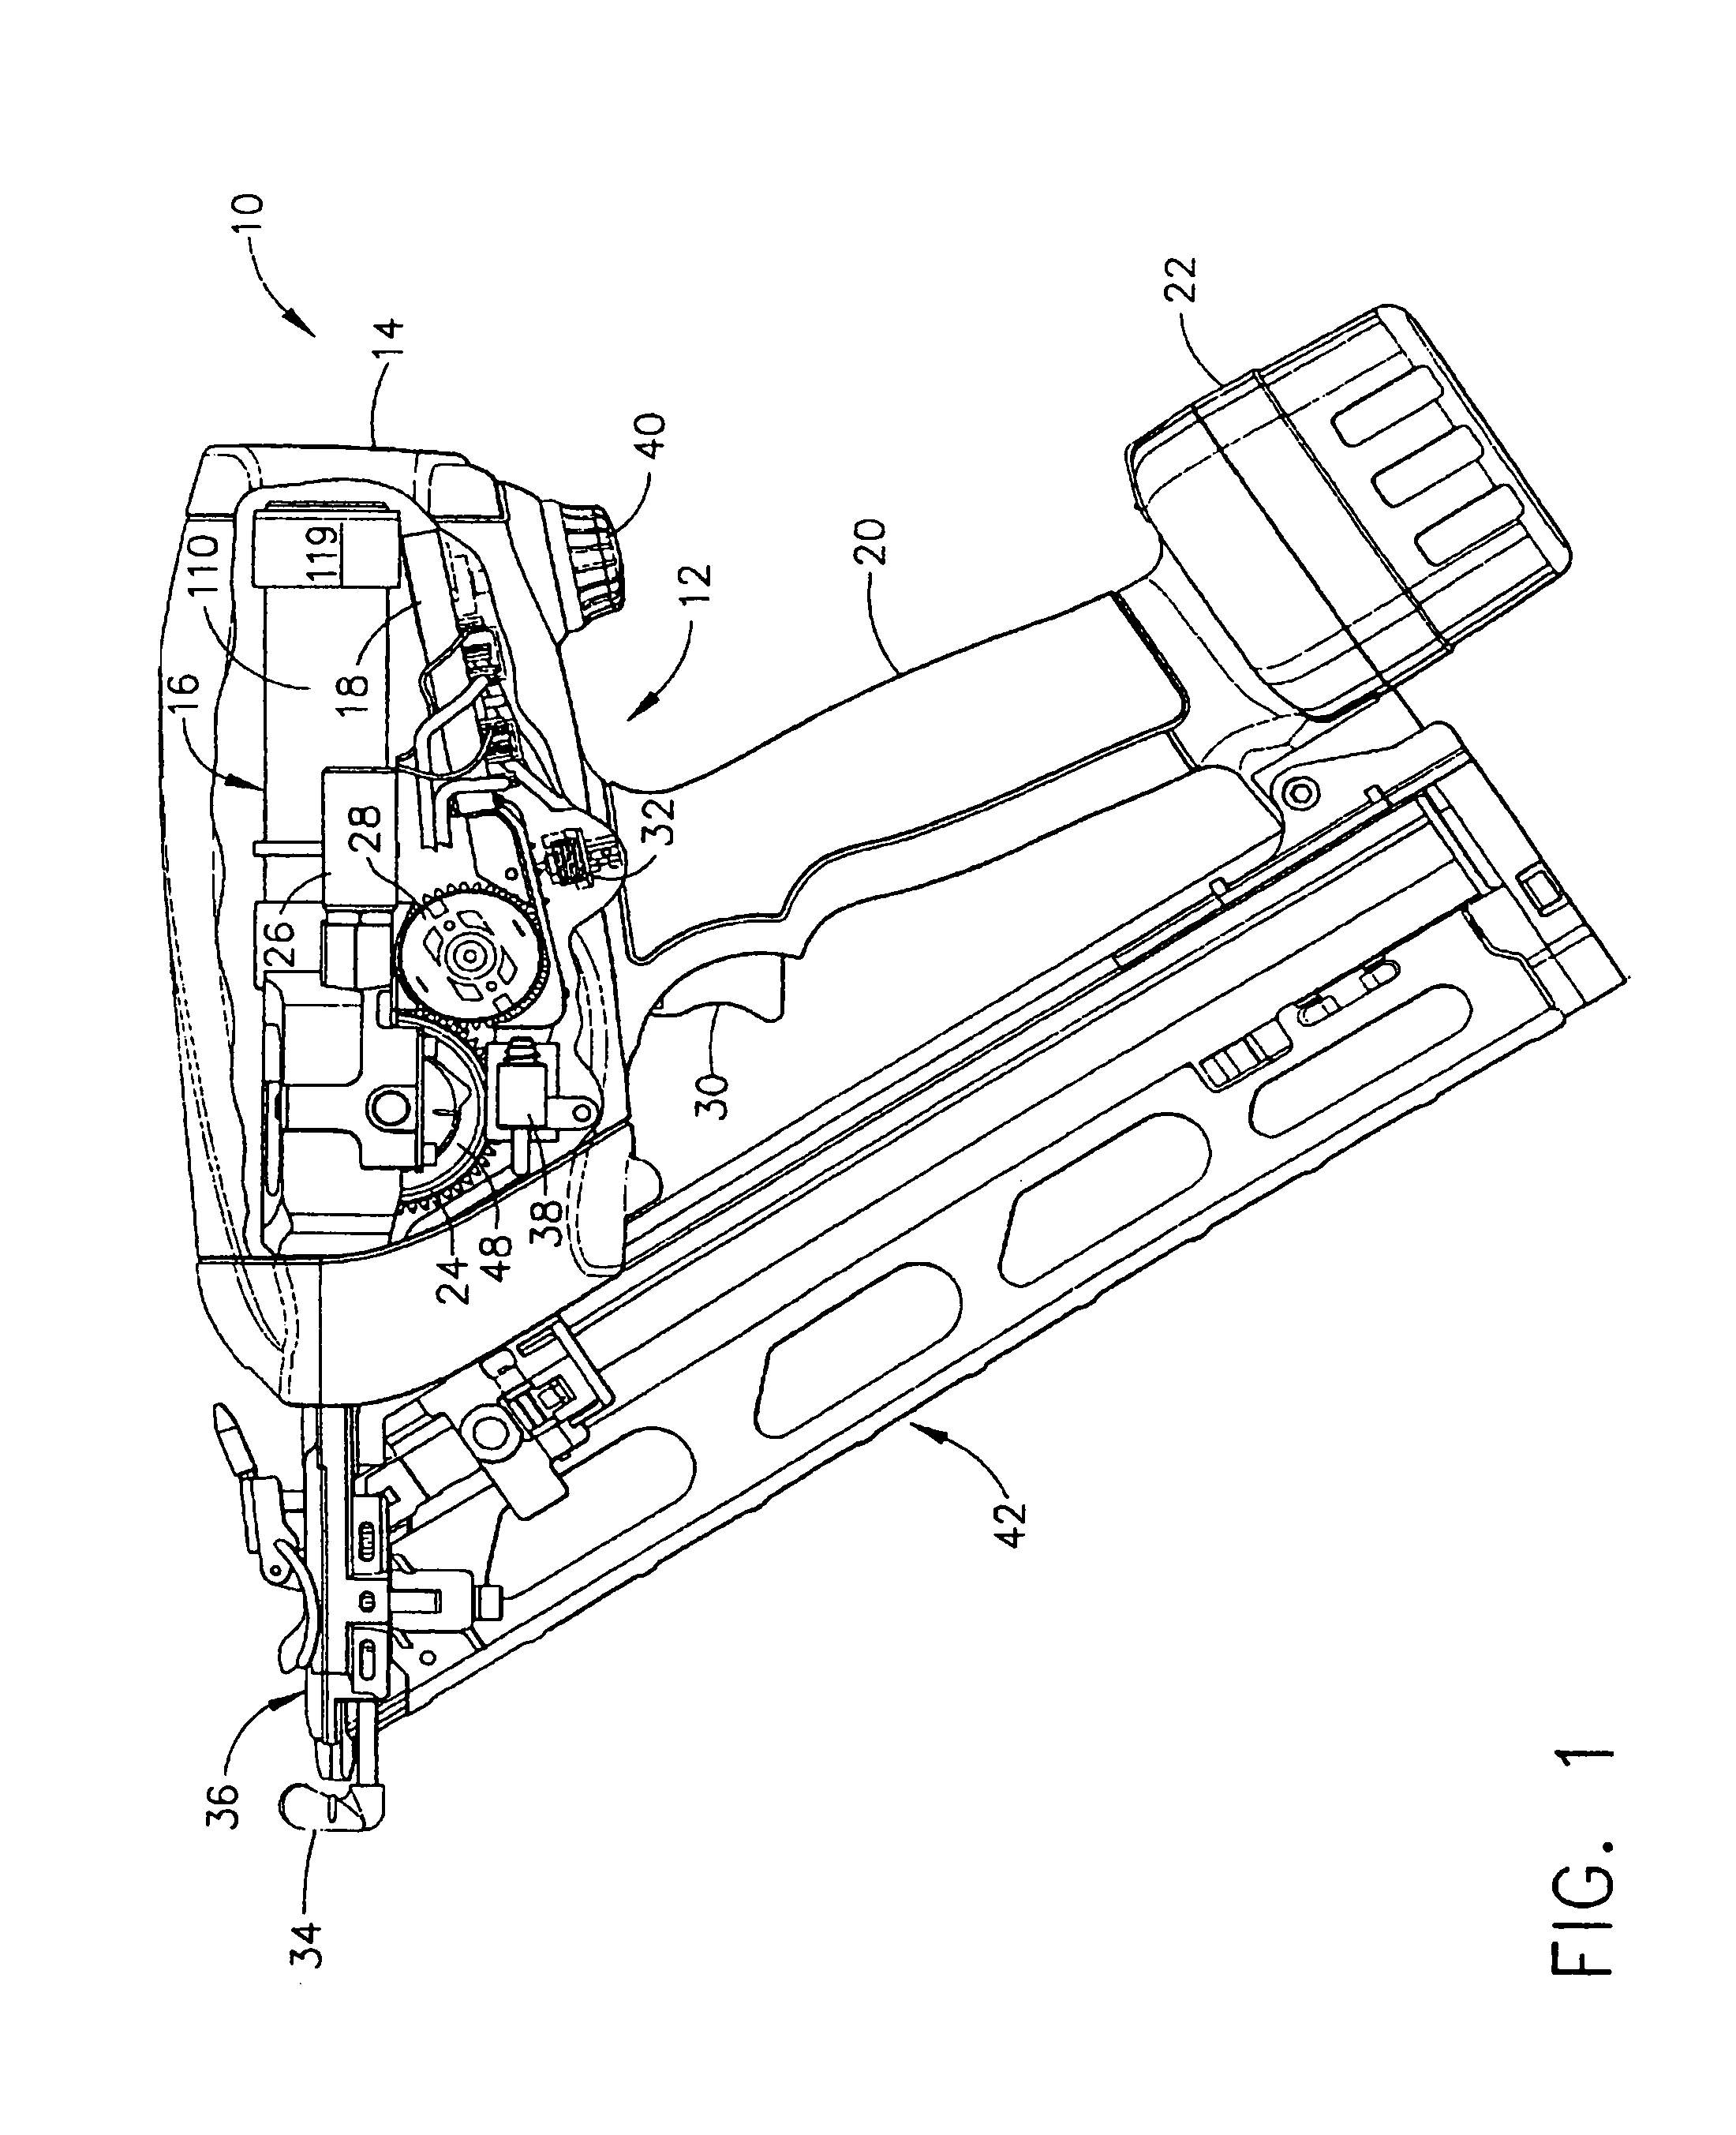 Control module for flywheel operated hand tool